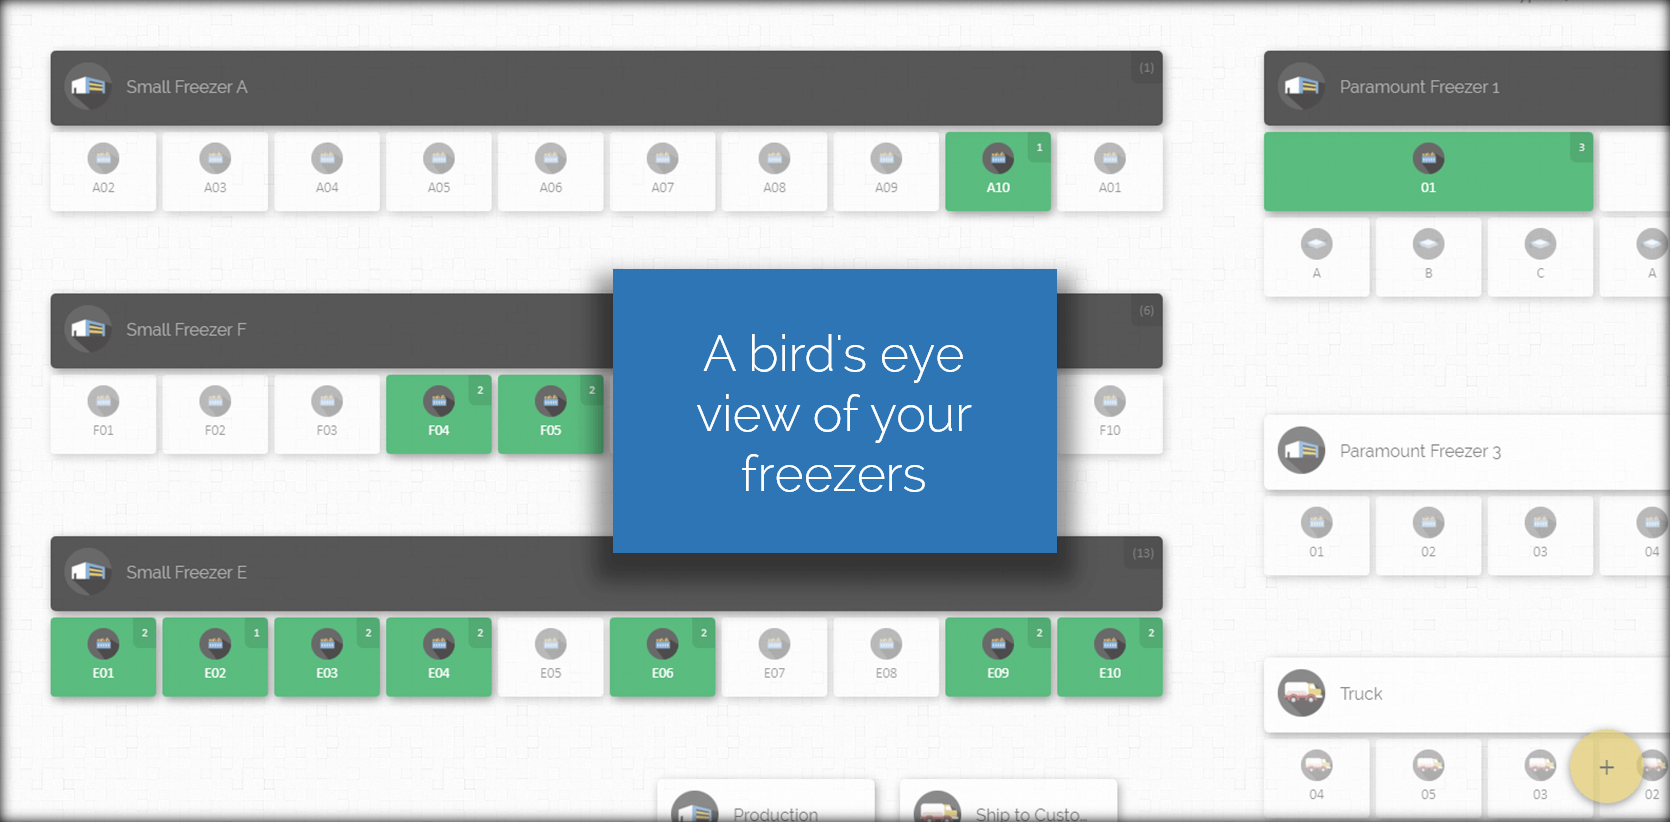 Cold Storage (Freezer) Inventory Management and Tracking Software From CyberStockroom. A bird's eye view of your freezers.